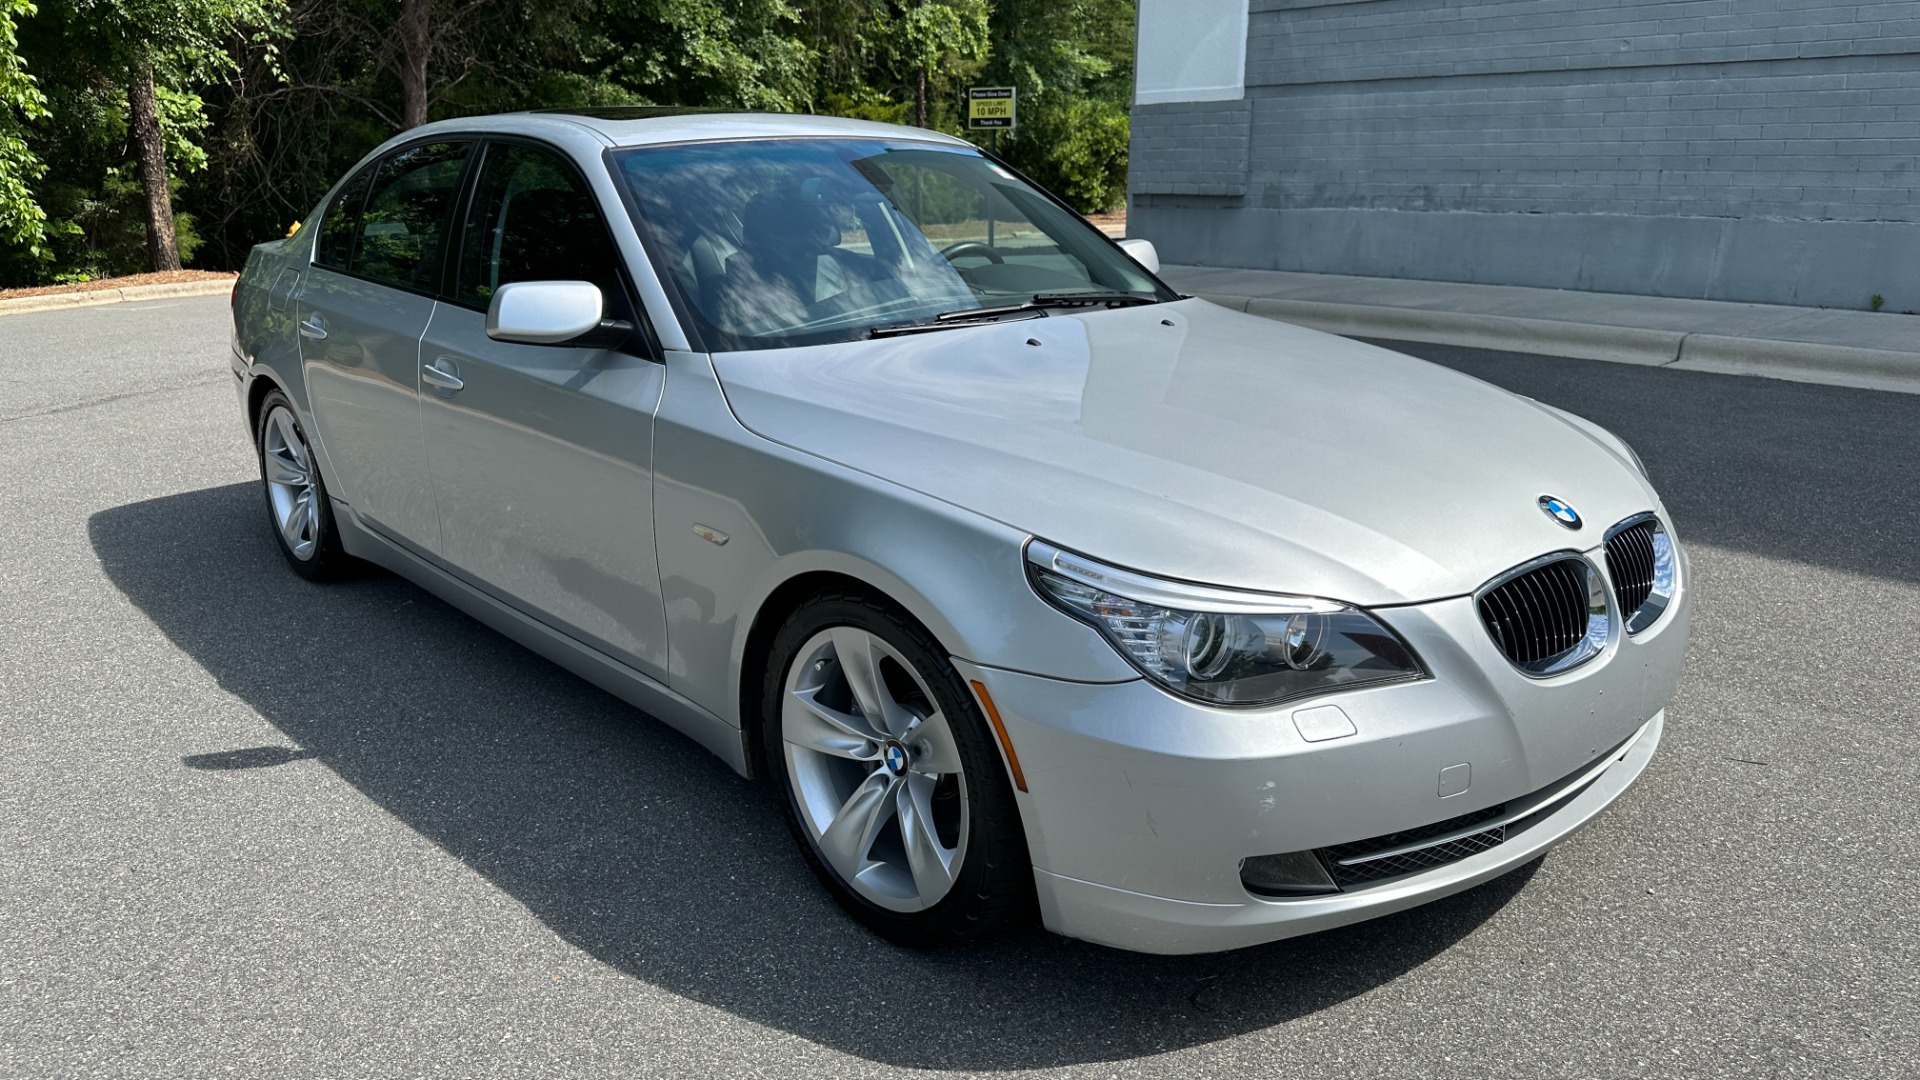 Used 2009 BMW 5 Series 528i / SPORT PACKAGE / PREMIUM PACKAGE / DAKOTA LEATHER for sale $14,995 at Formula Imports in Charlotte NC 28227 2